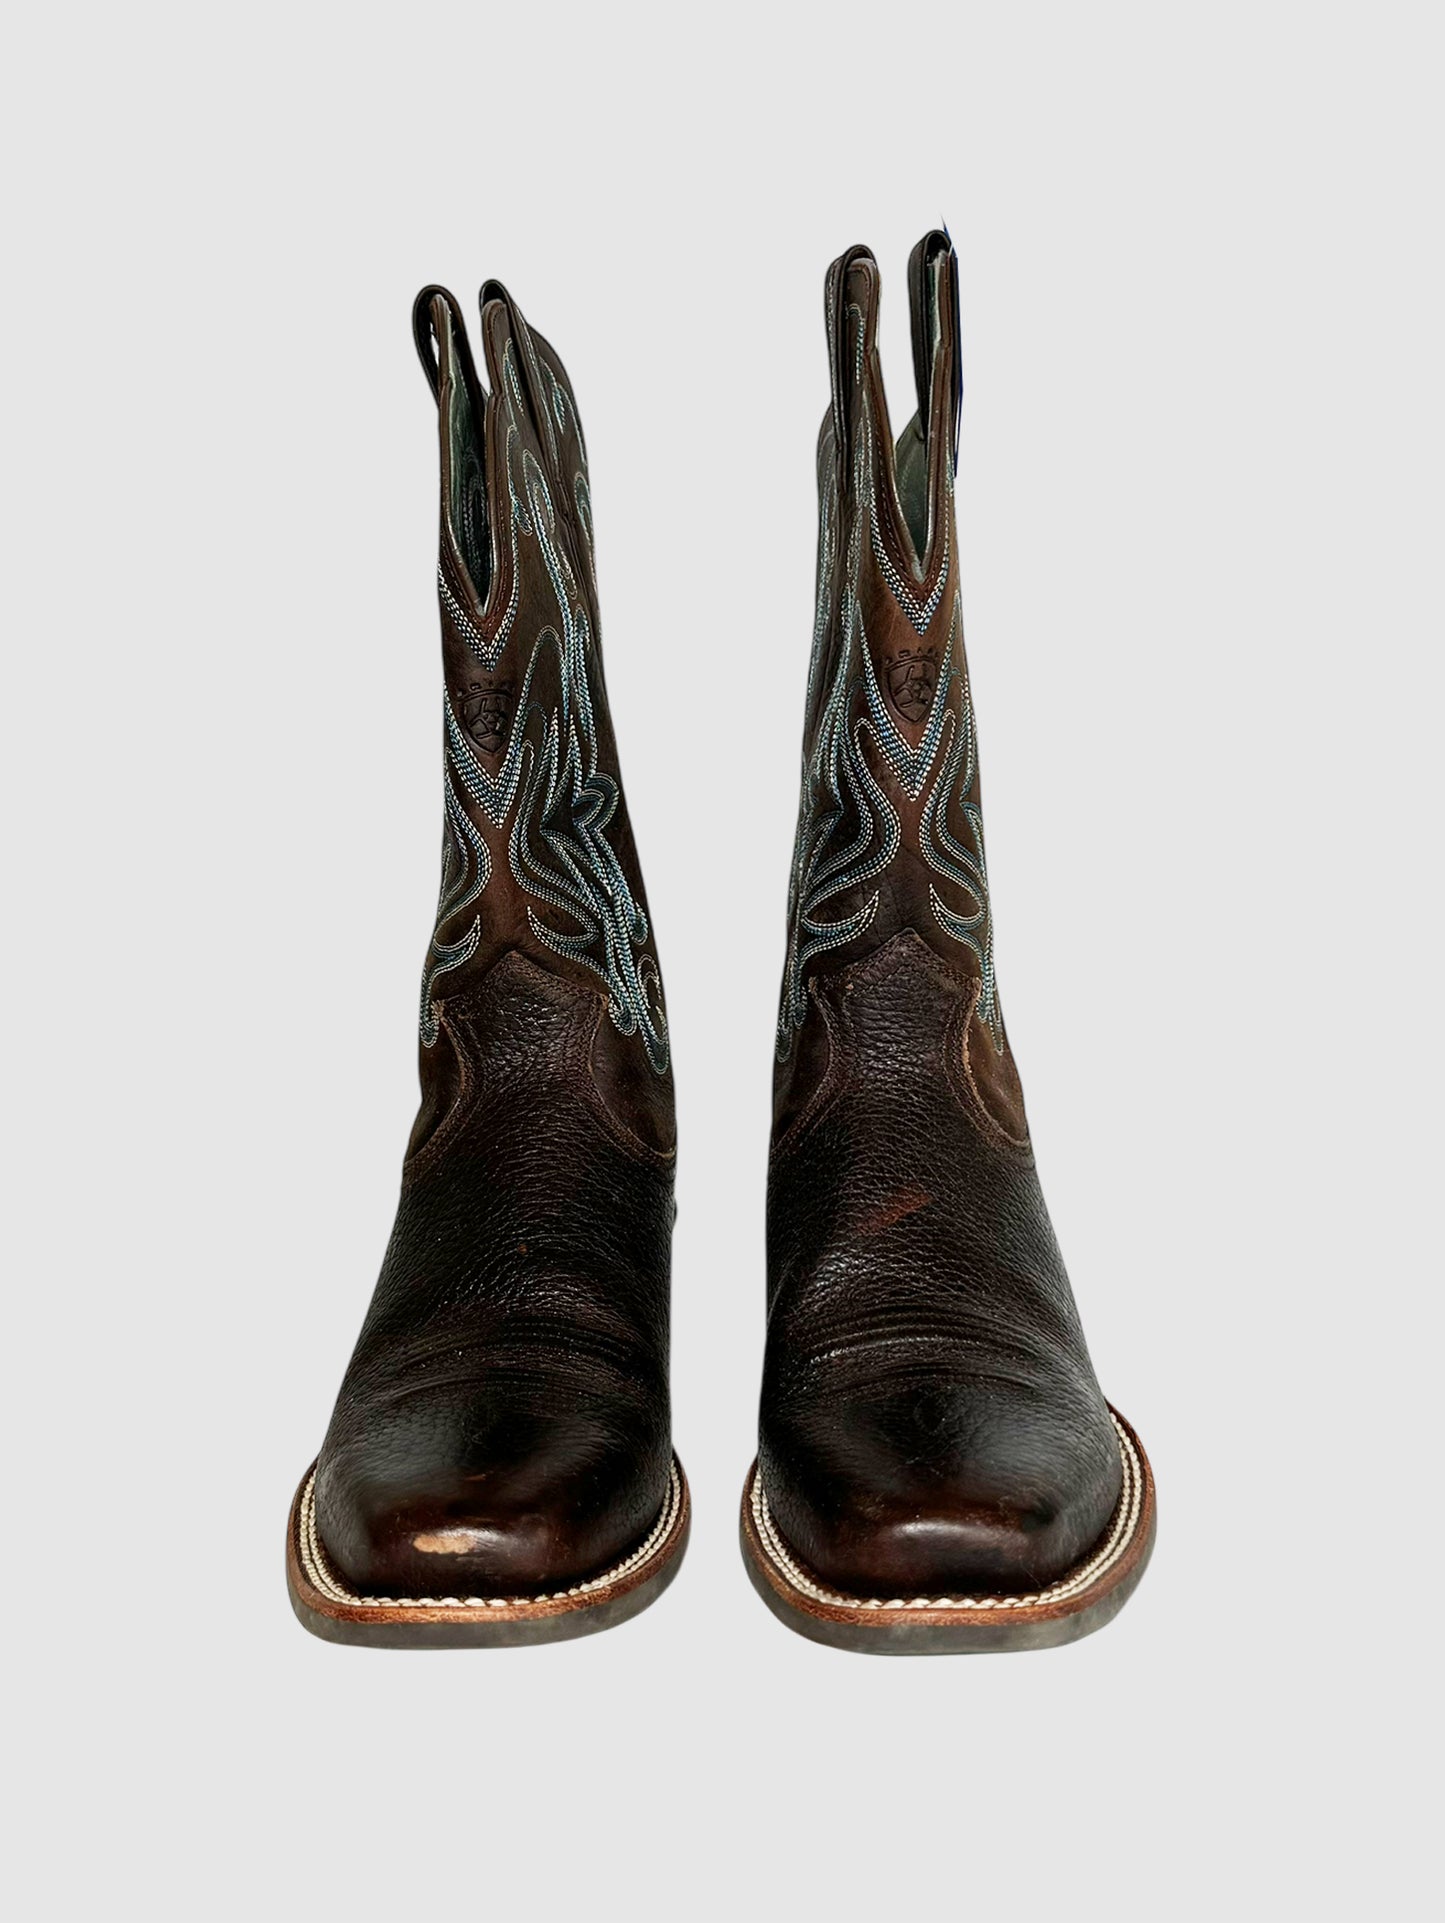 Leather Western Boots - Size 37.5